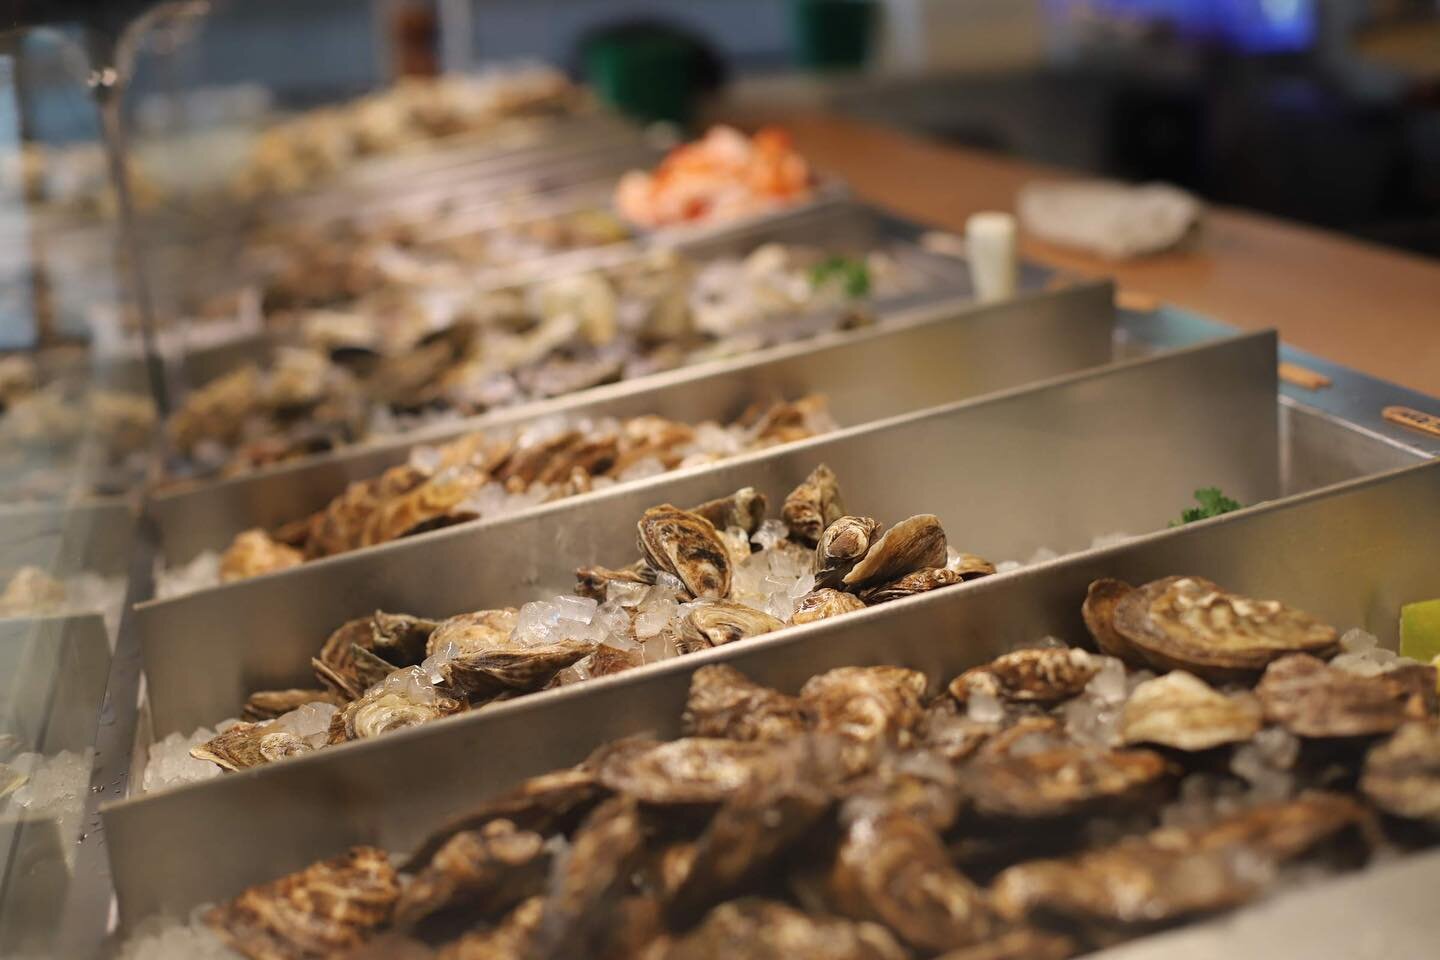 Our #rawbar is always stocked with the freshest shellfish, and you can even take a seat and enjoy the action as our team serves up your favorites! 🦐🦪
.
#shellfish #oysters #shrimp #newtownpa #newtown #buckscountypa #buckscounty #newrestaurant